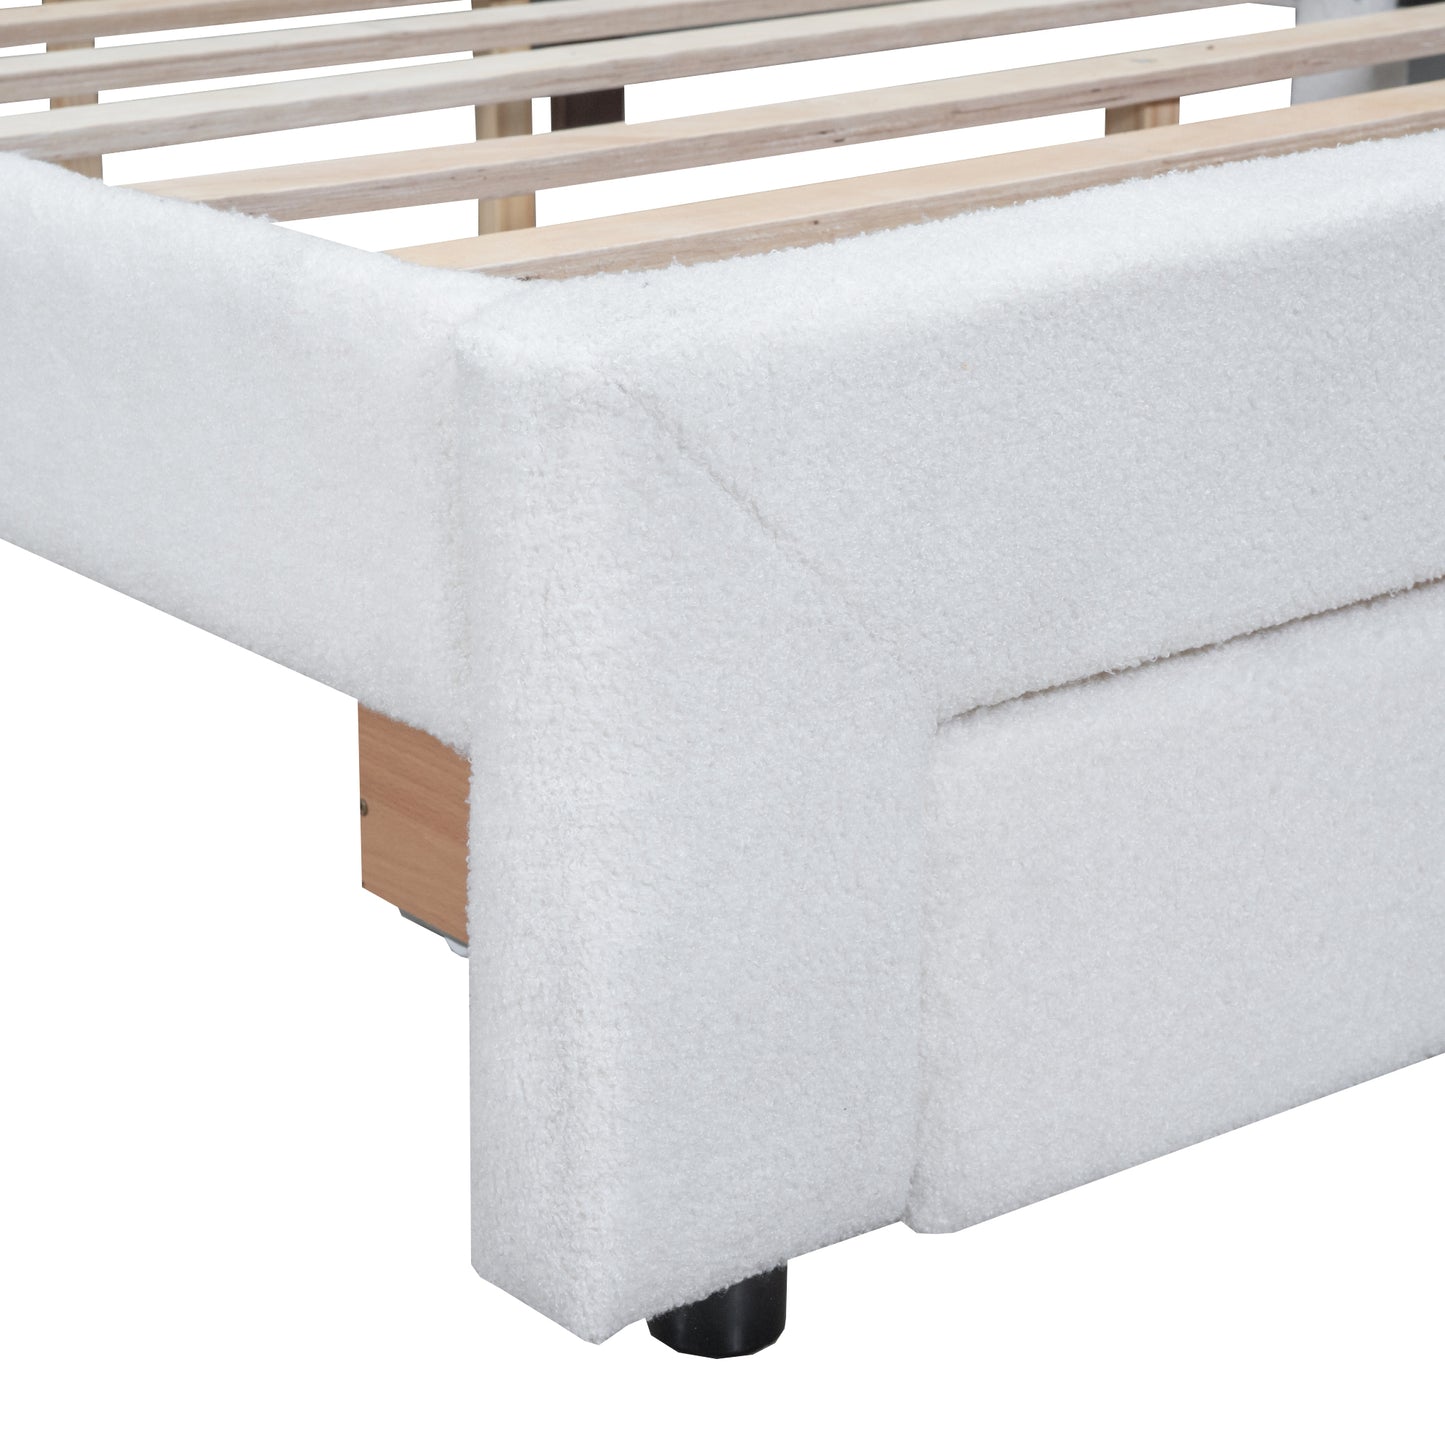 Teddy Fleece Queen Size Upholstered Platform Bed with Drawer, White